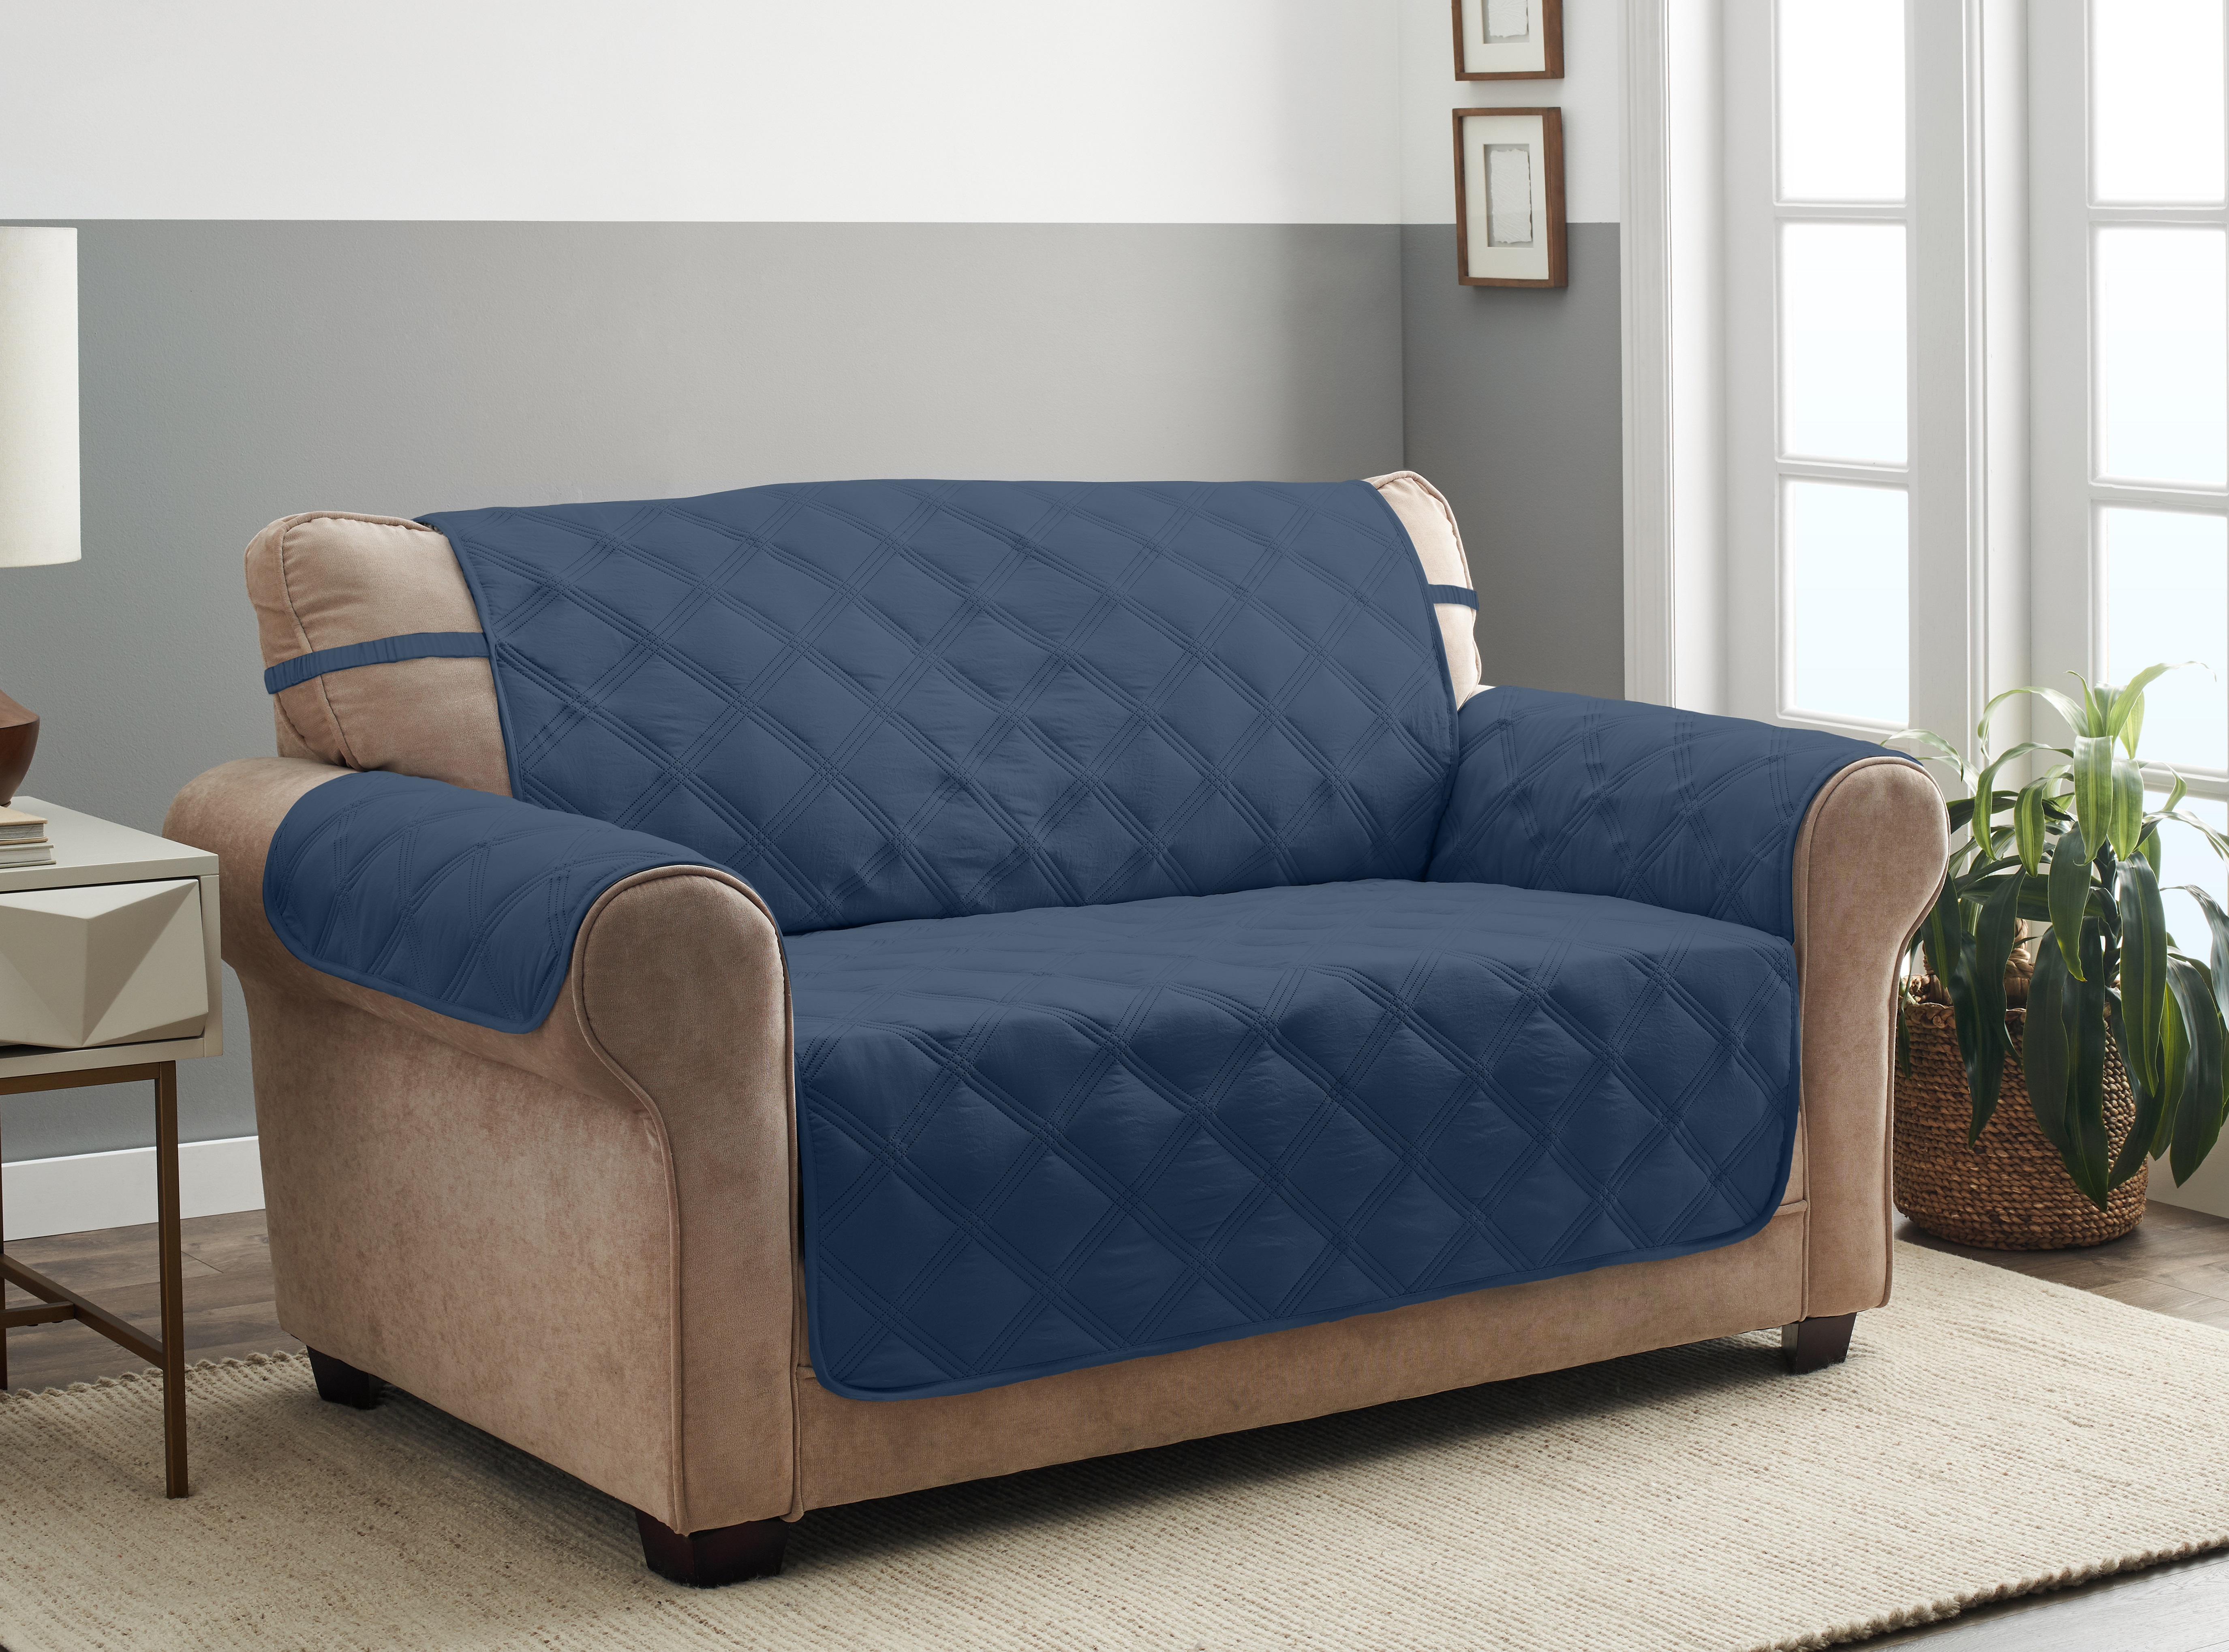 Innovative Textile Solutions 1-piece Hampton Diamond Secure Fit Loveseat Furniture Cover, Blue - image 1 of 7